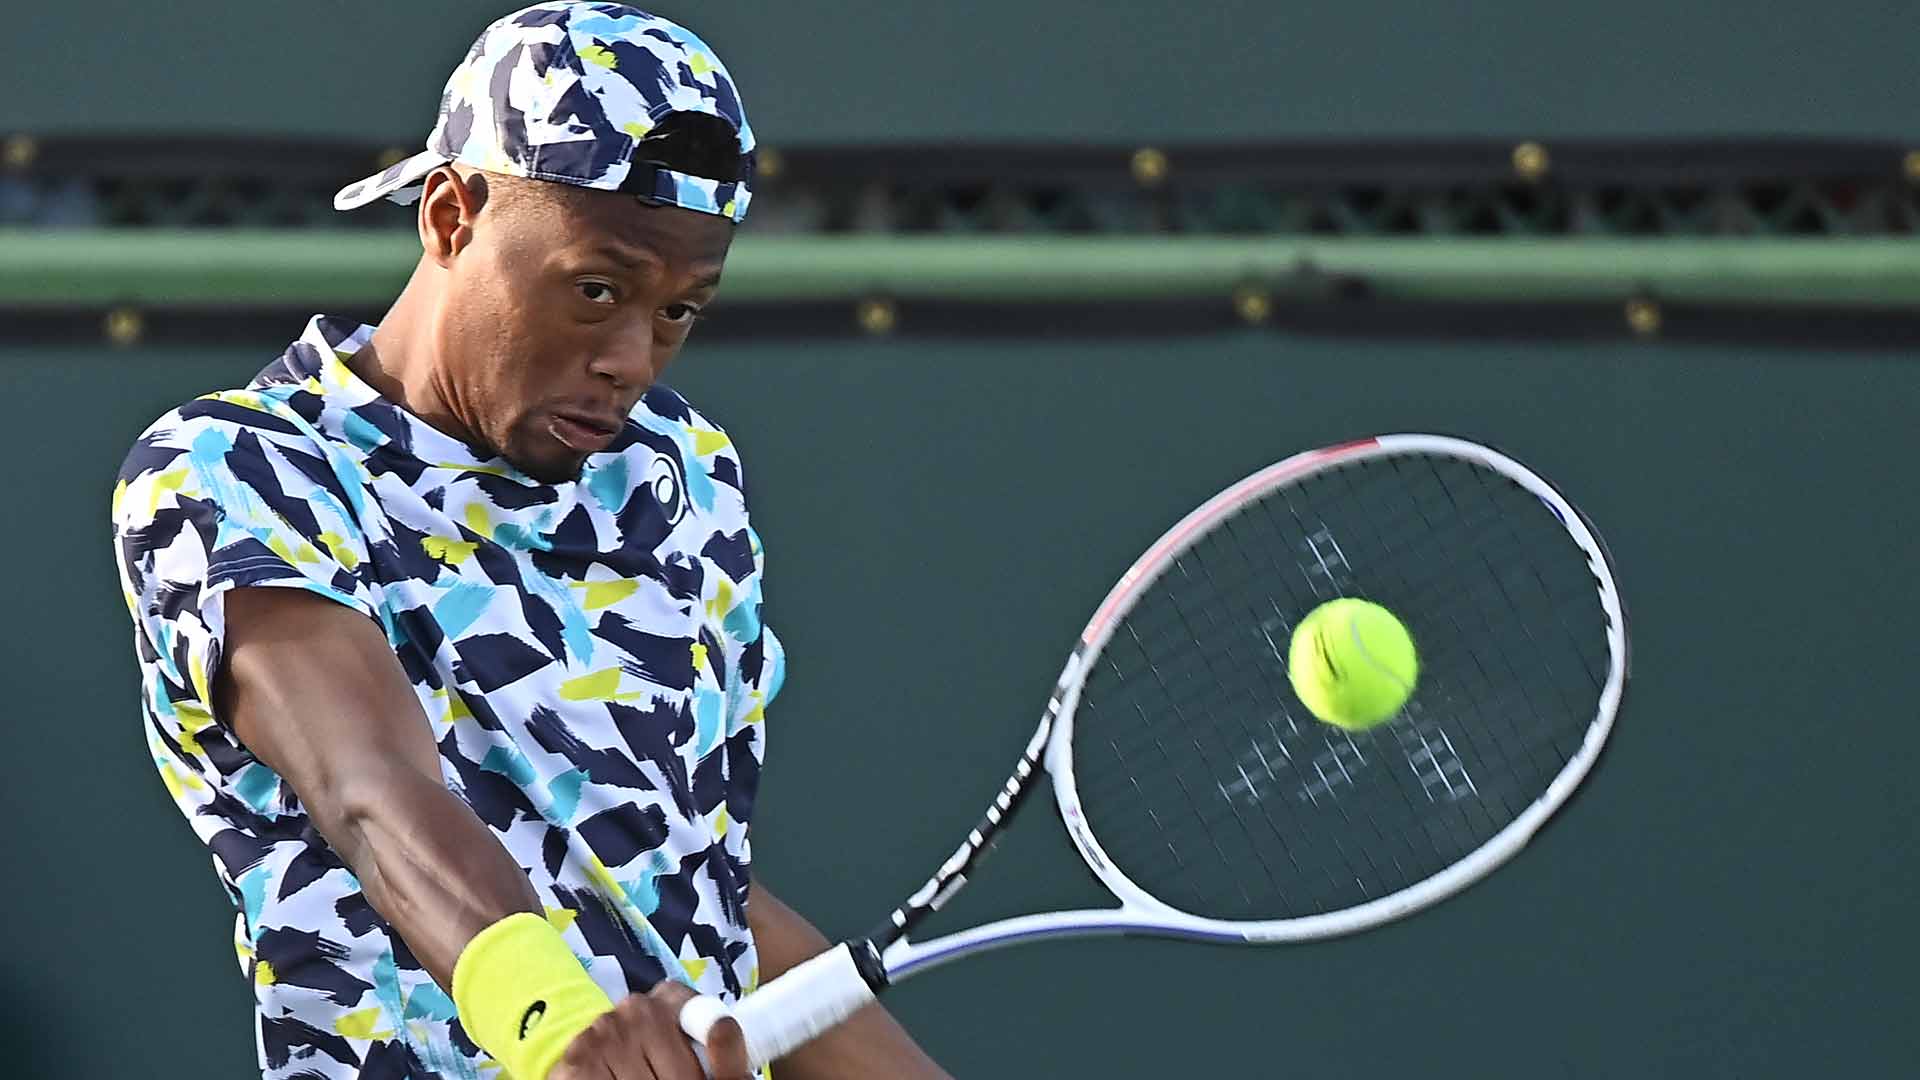 Who Is Christopher Eubanks, the American Tennis Player Having a